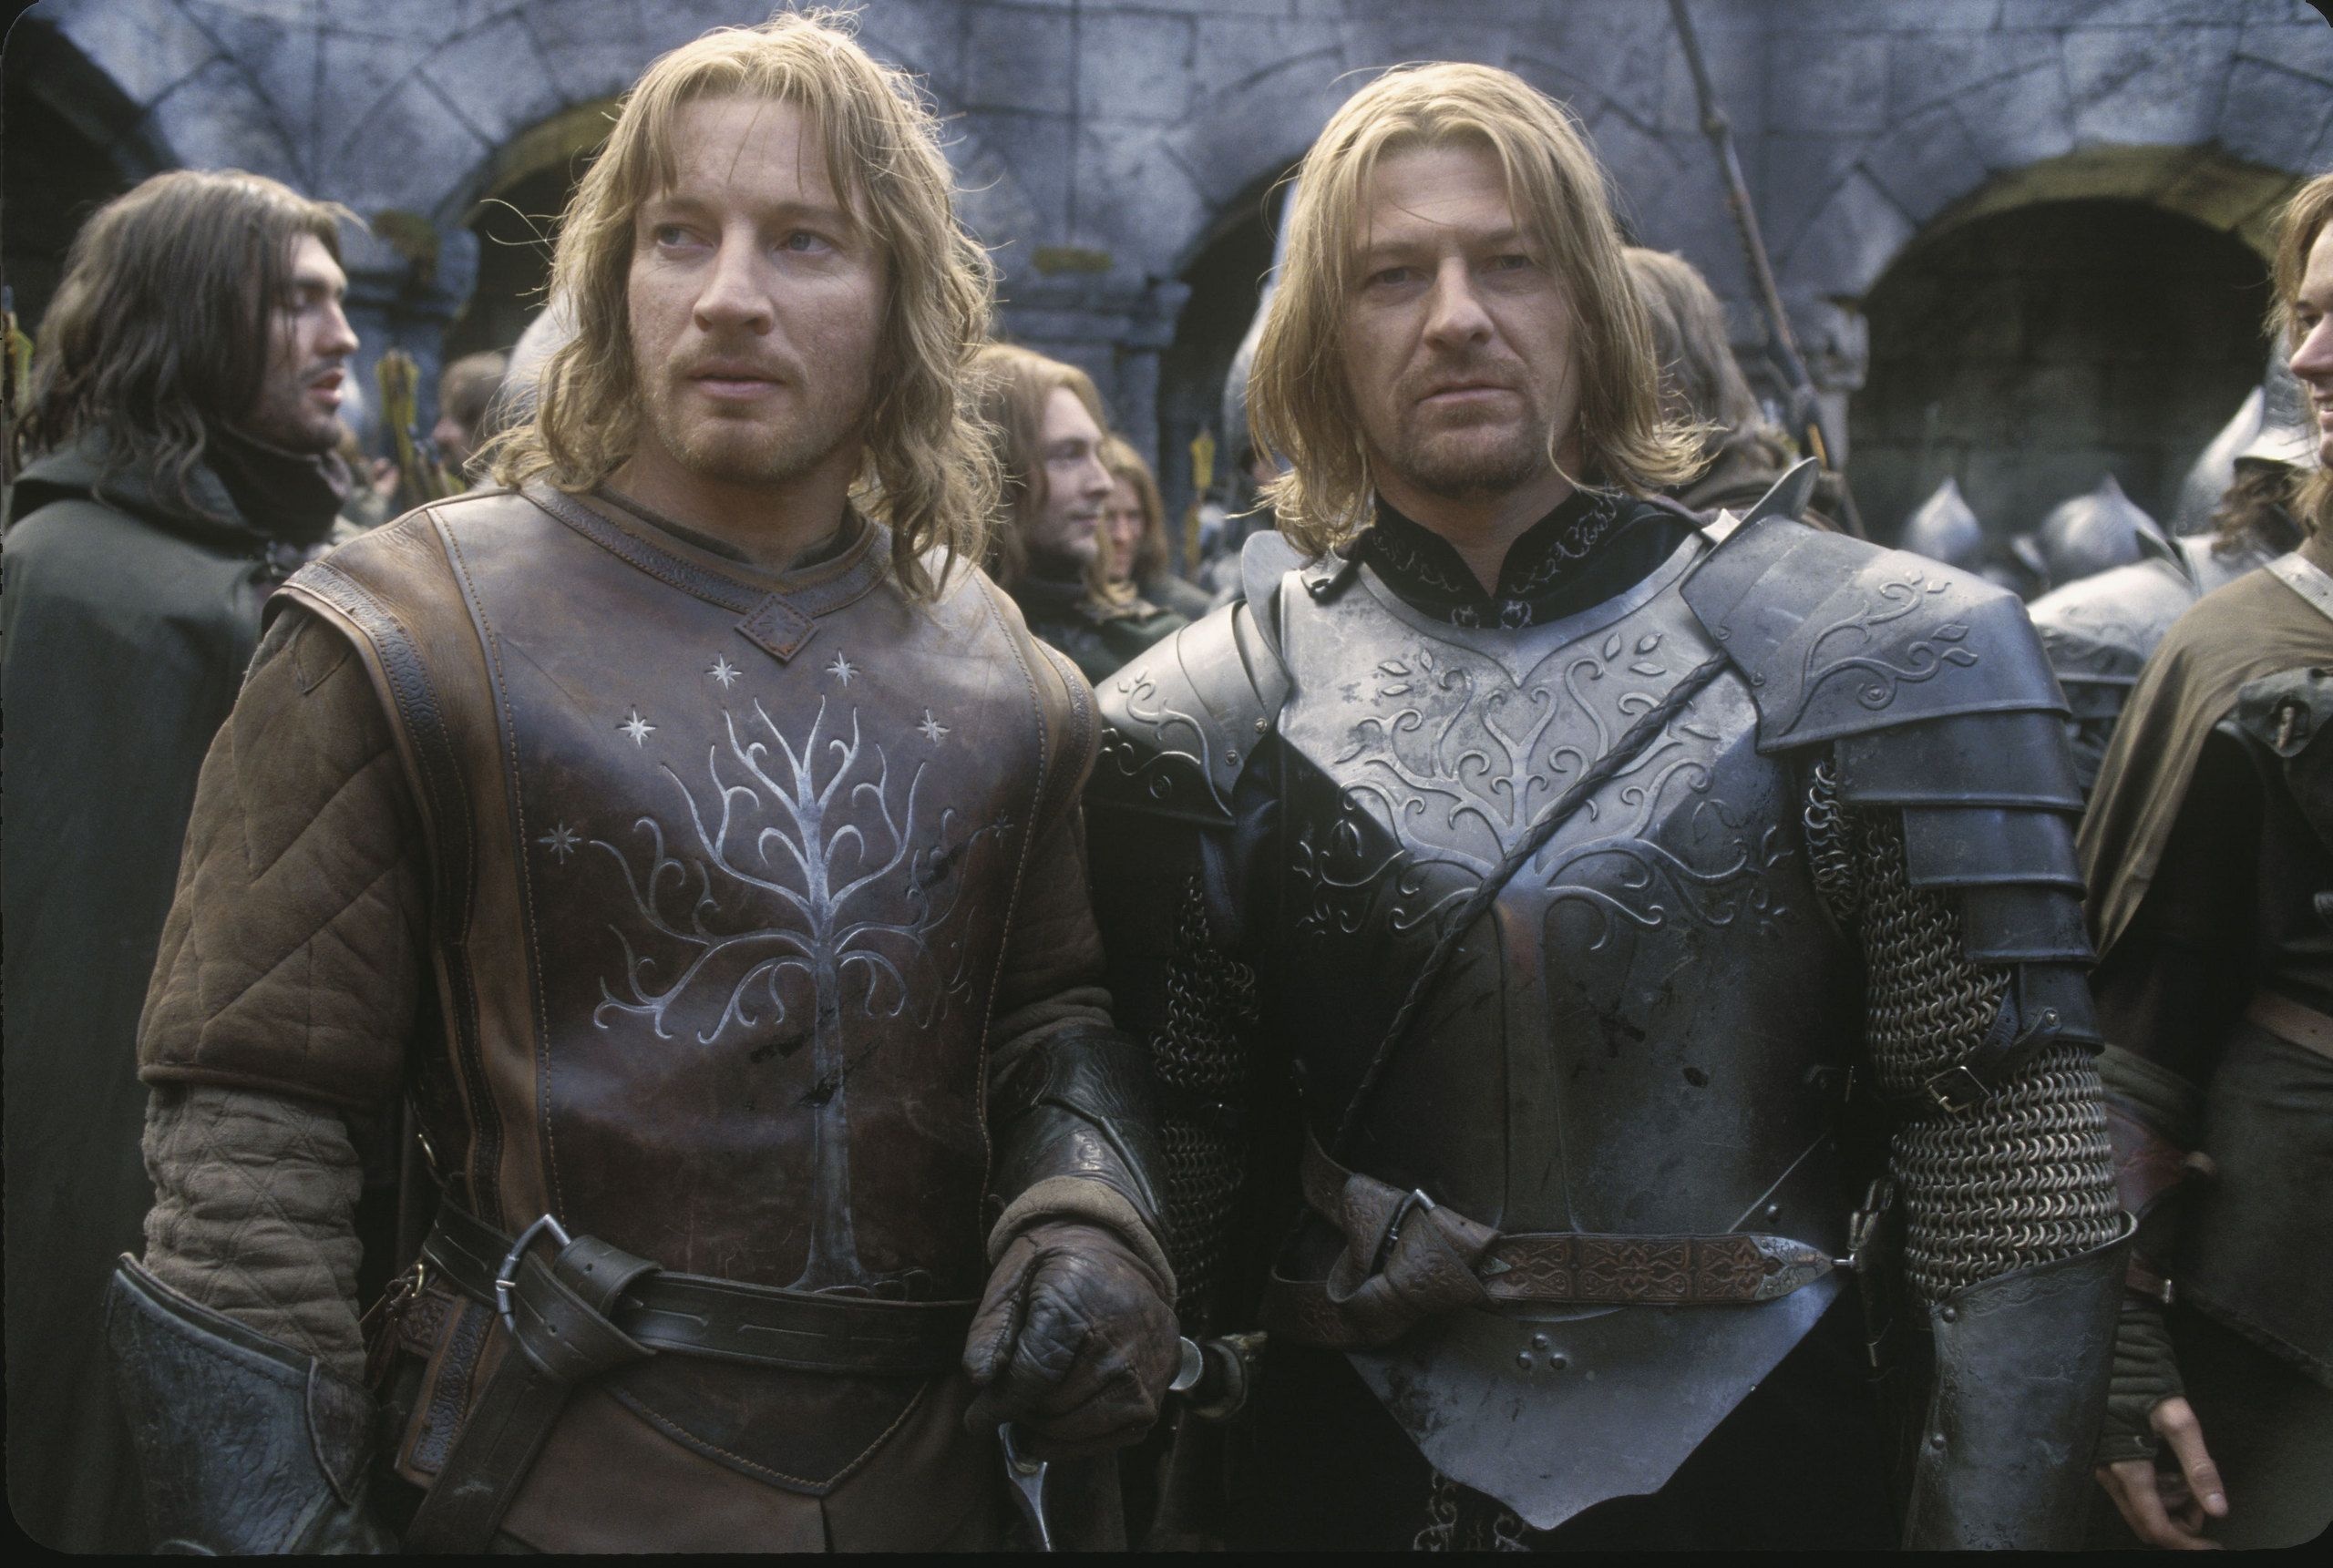 Lord of the Rings, Faramir photo, Middle-earth characters, Movie still, 2560x1730 HD Desktop